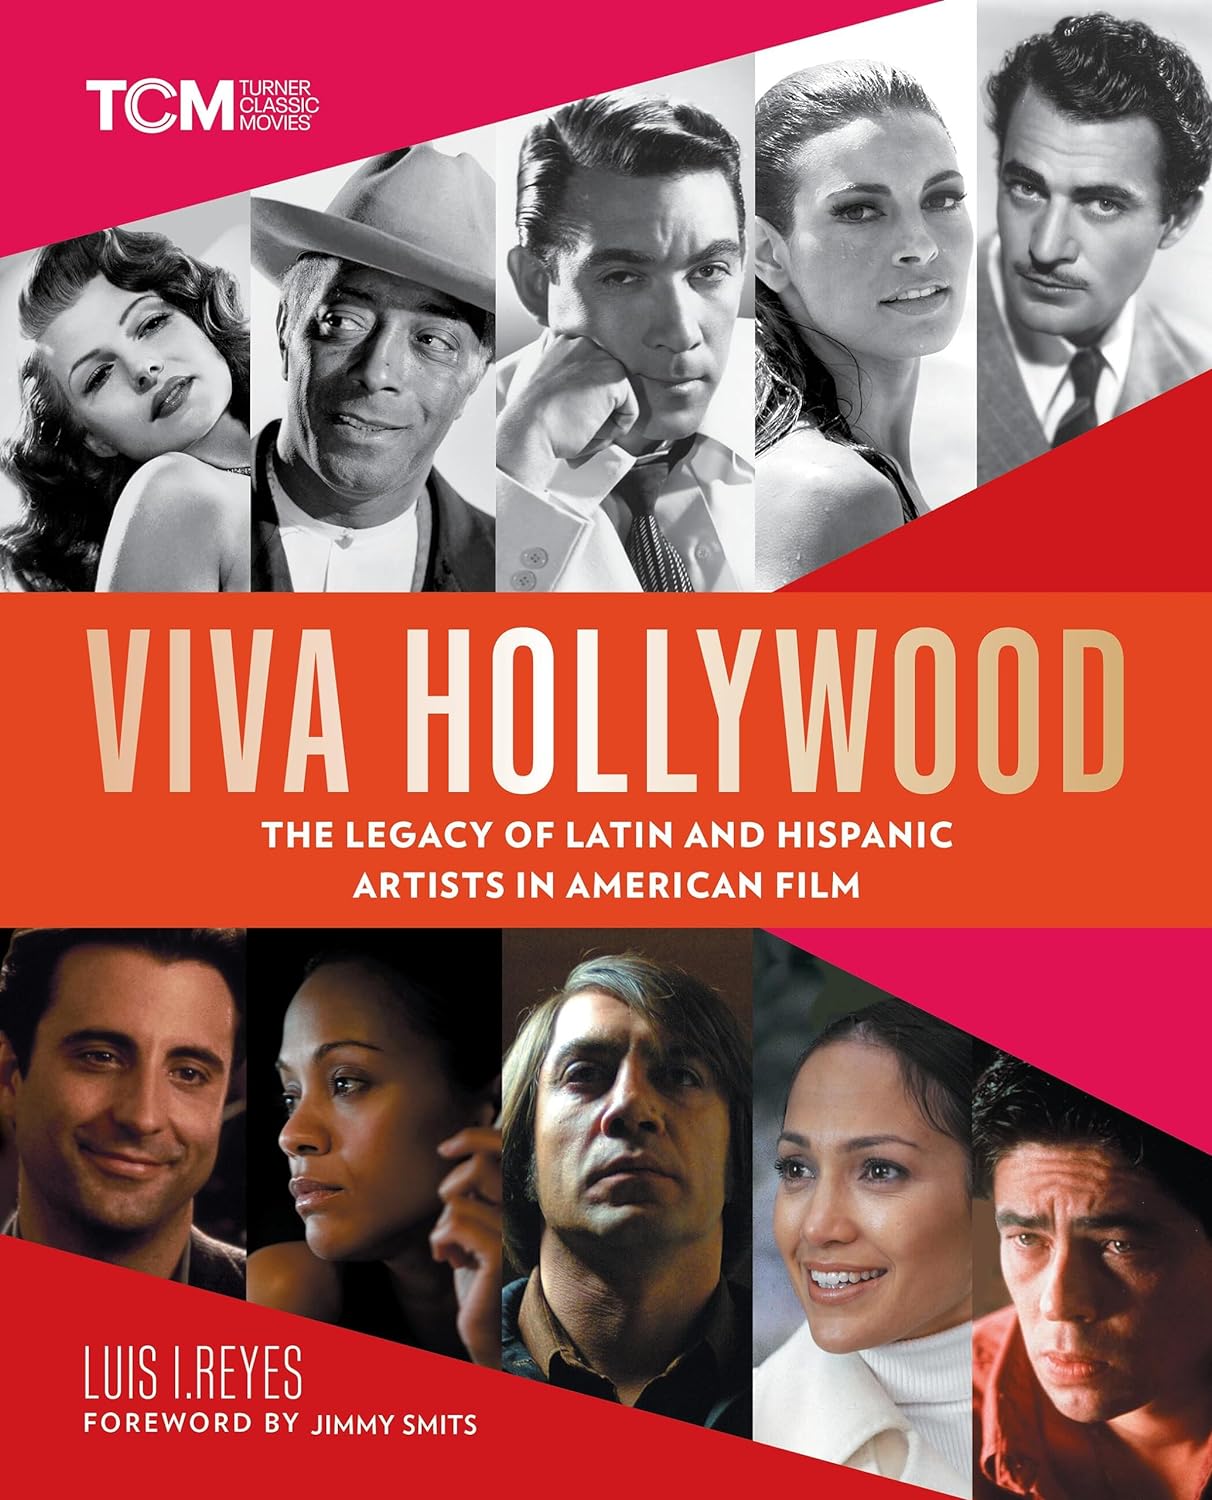 Viva Hollywood: The Legacy of Latin and Hispanic Artists in American Film (Turner Classic Movies) Hardcover